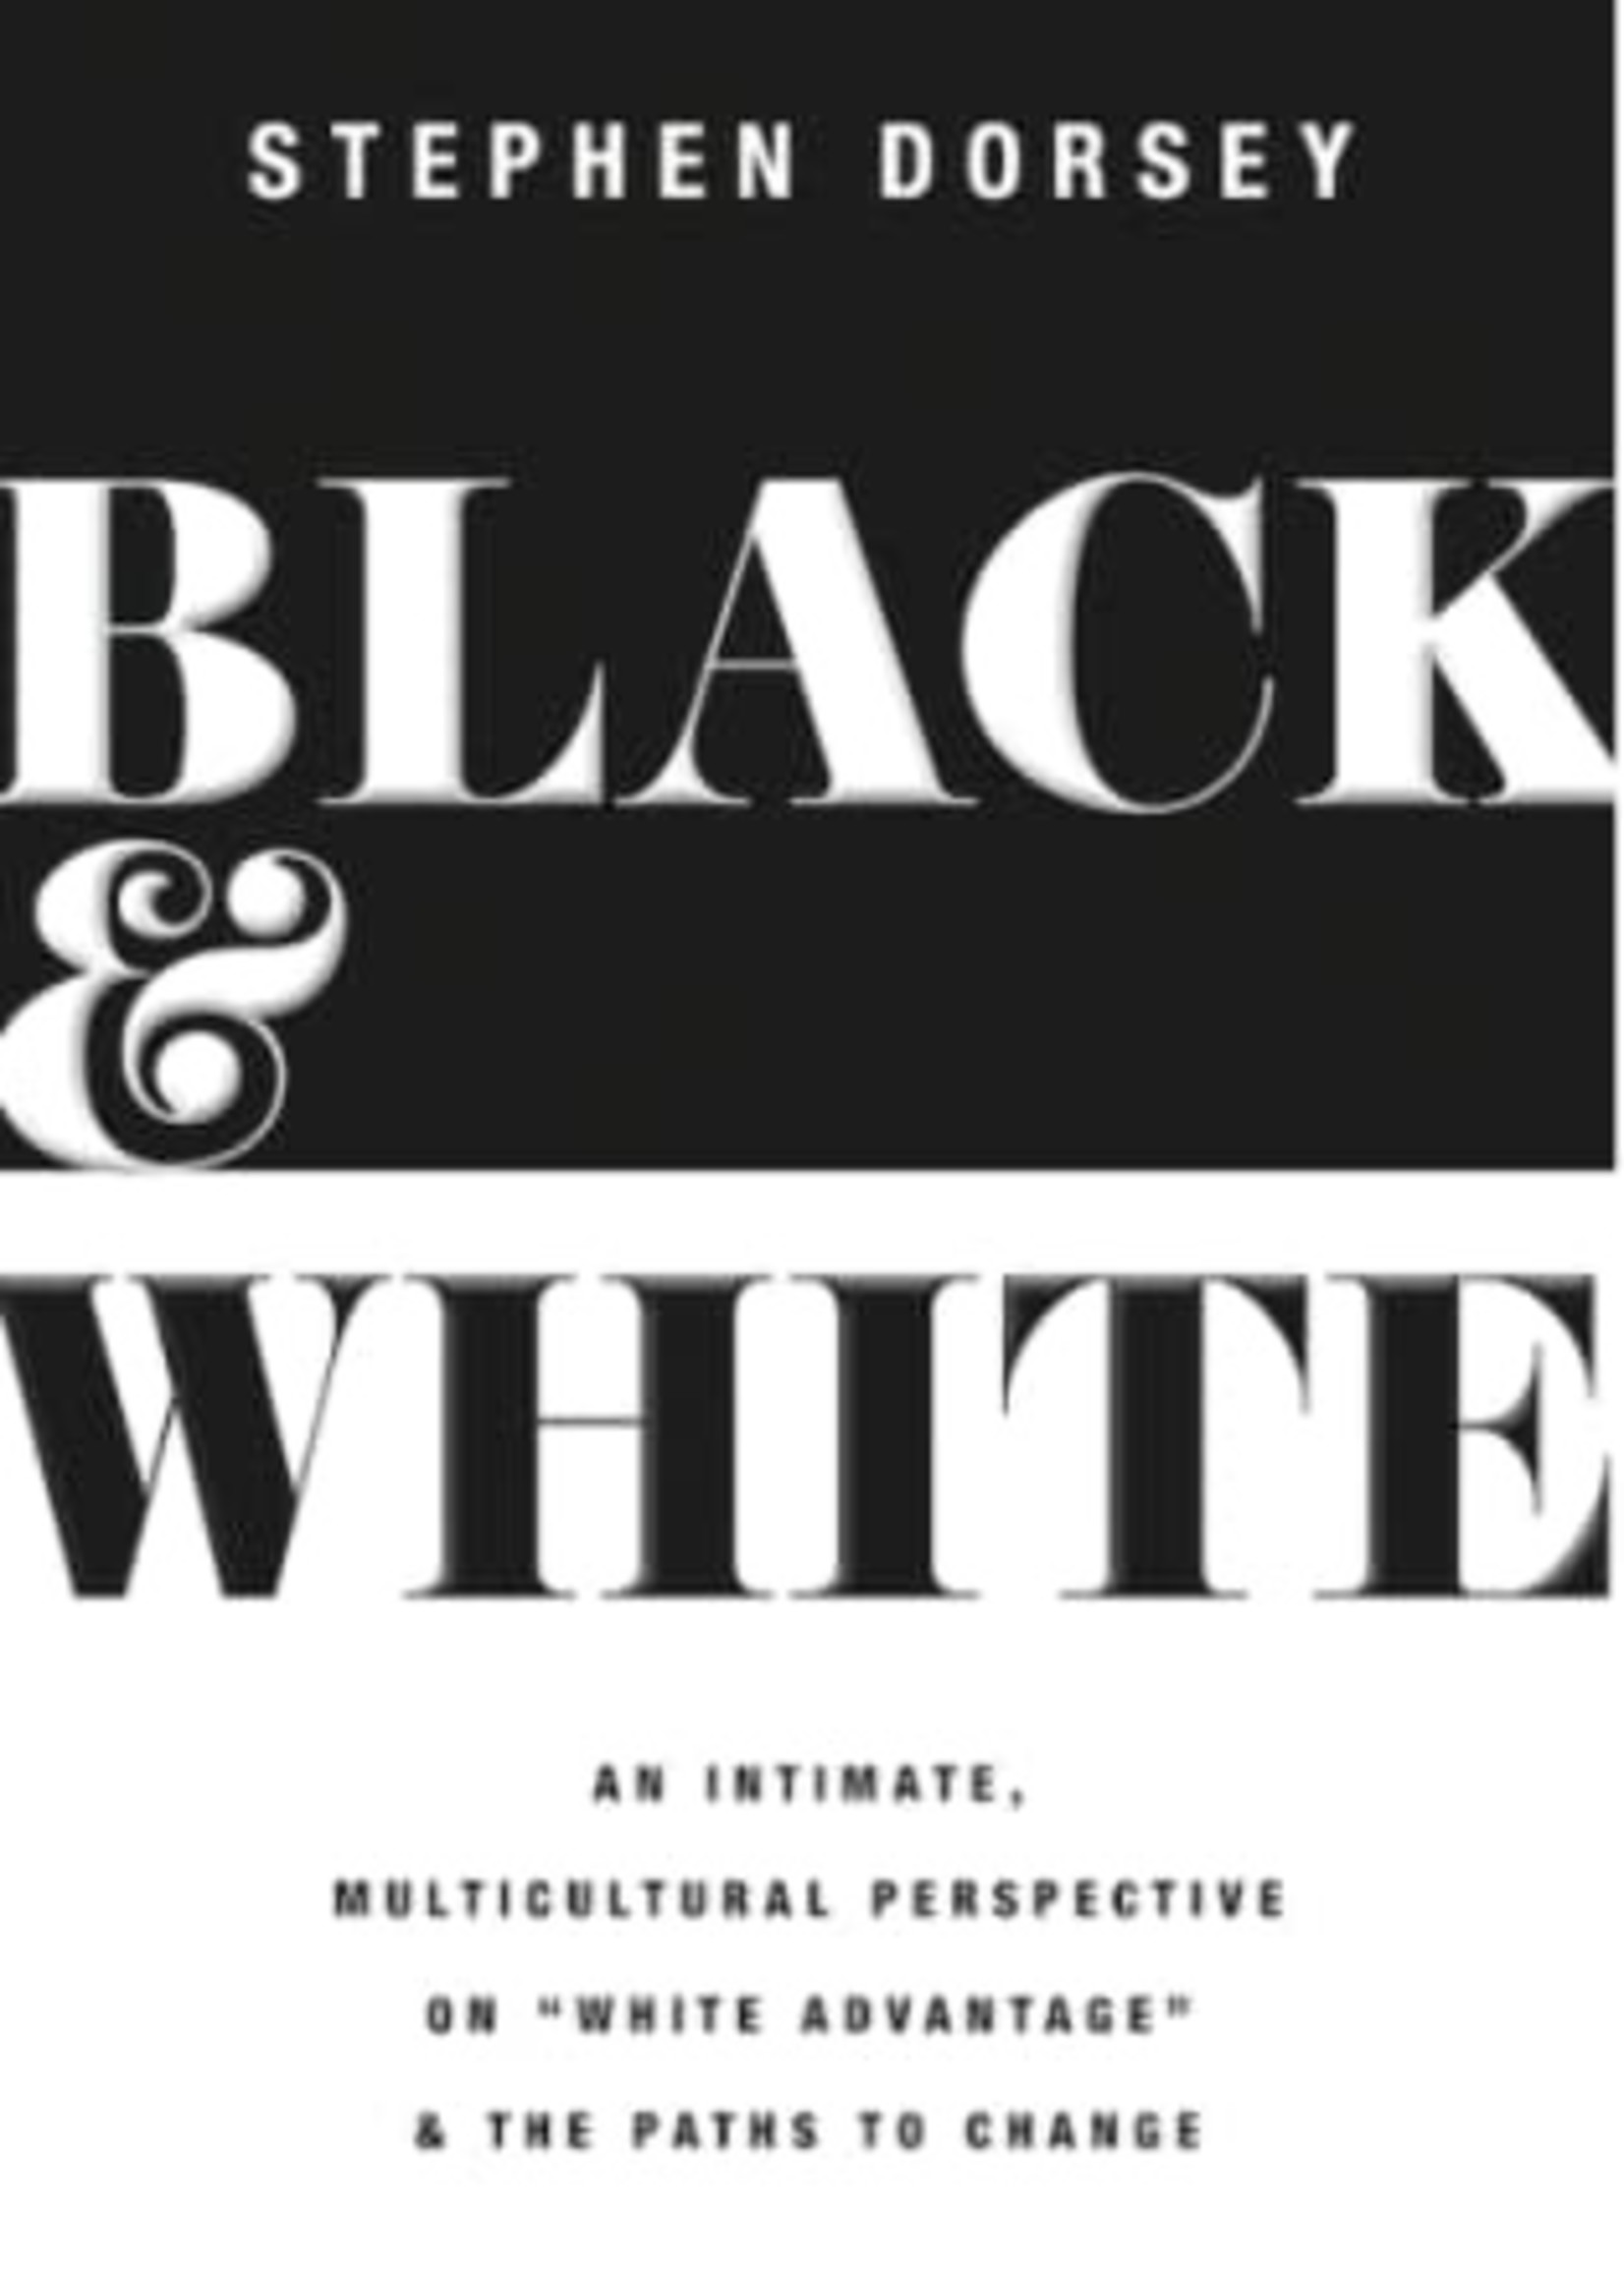 Black and White: An Intimate, Multicultural Perspective on "White Advantage" and the Paths to Change by Stephen Dorsey